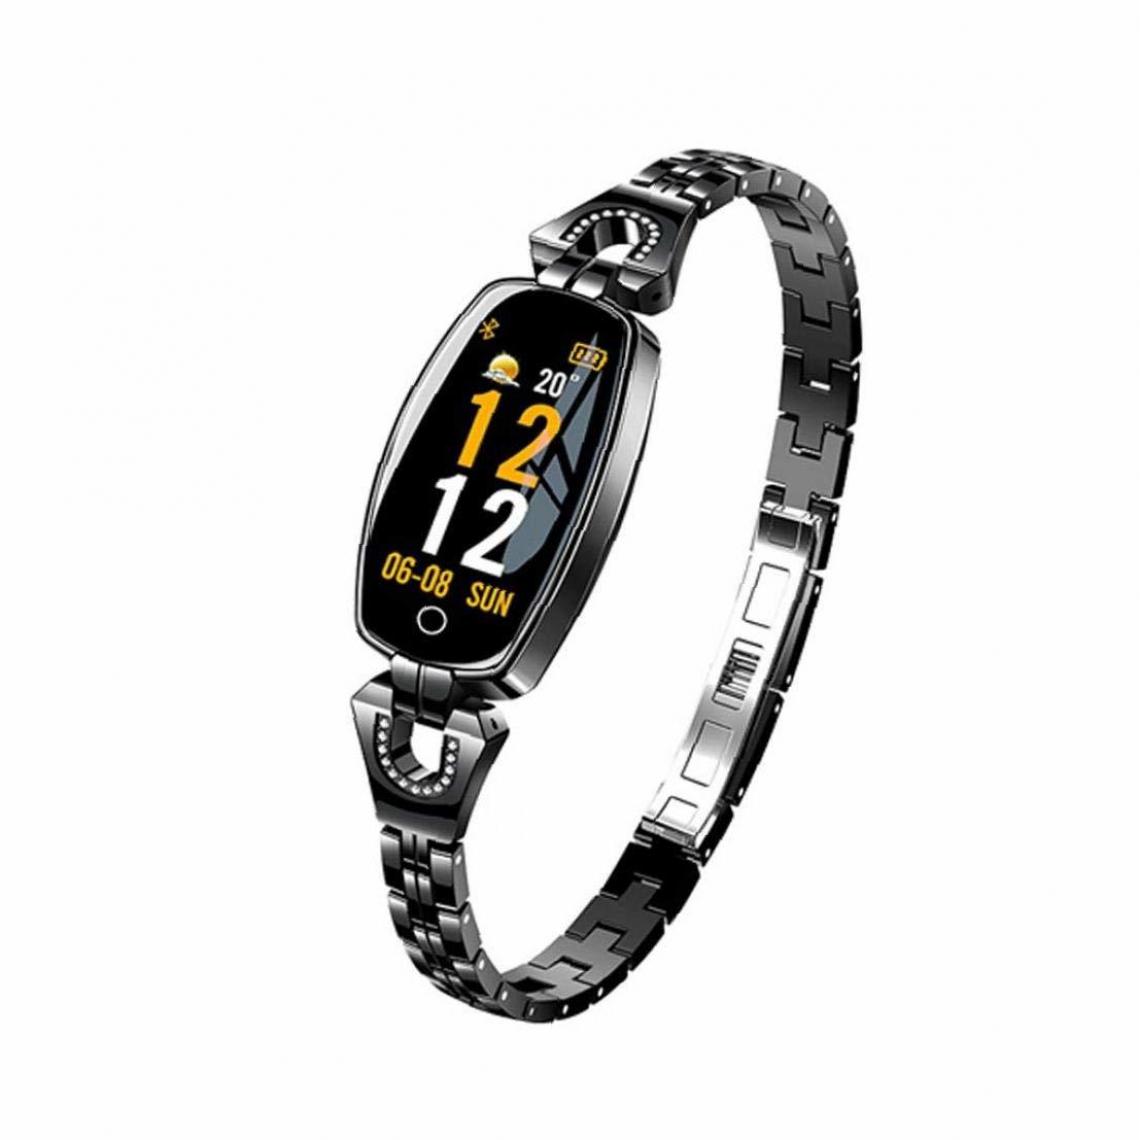 Chronotech Montres - Ladies Smart Watch H8 with Heart Rate Detection, Fitness Tracker, IP67 Waterproof (Black) - Montre connectée